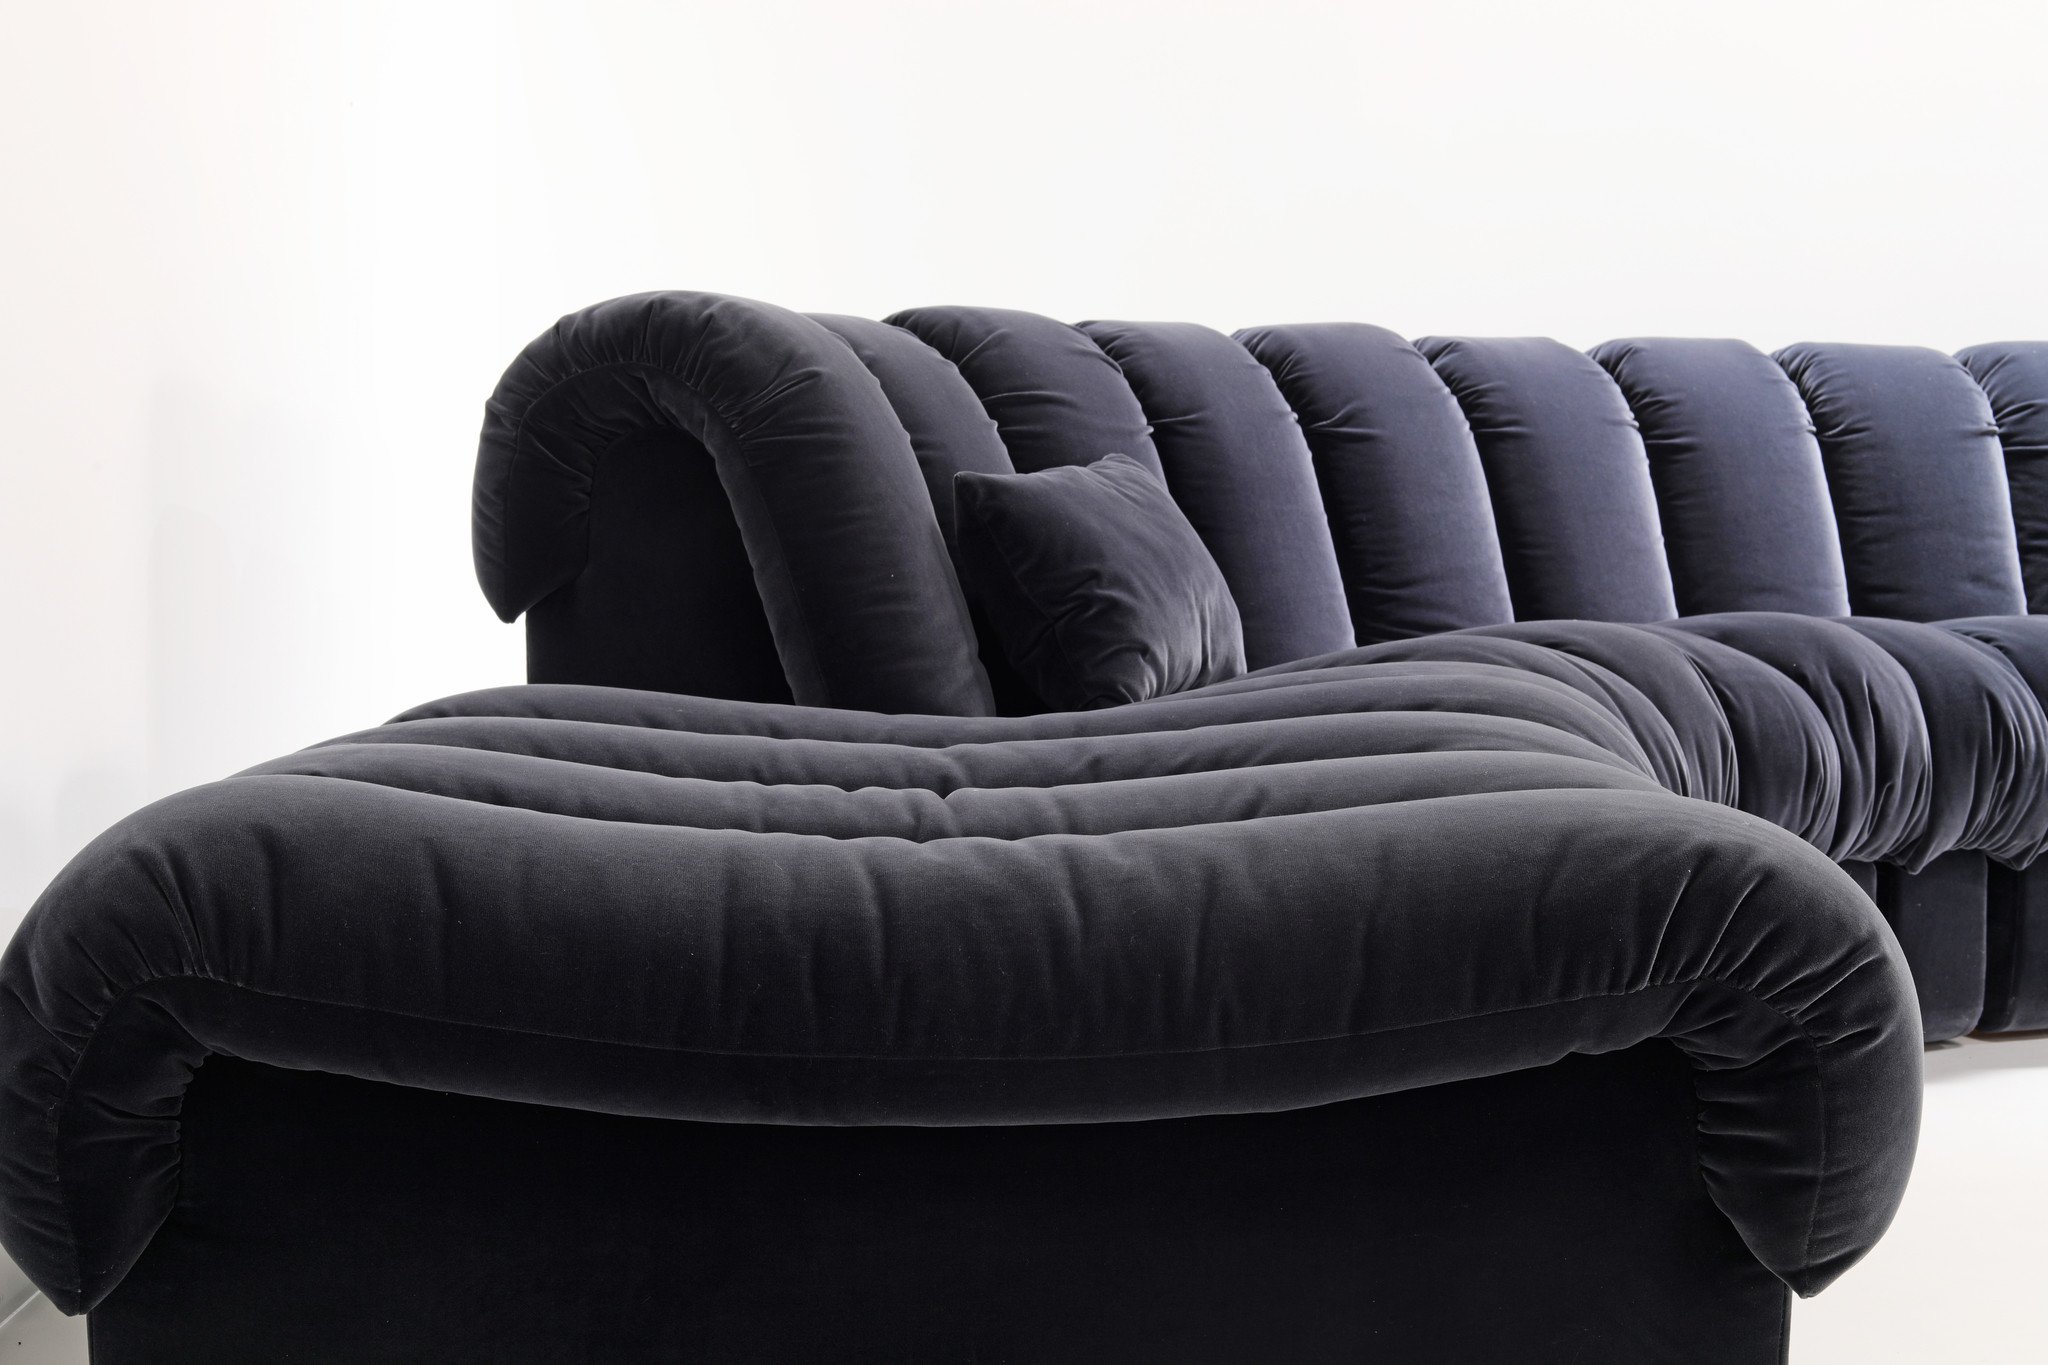 THE ICONIC "SNAKE SOFA" DE SEDE DS600